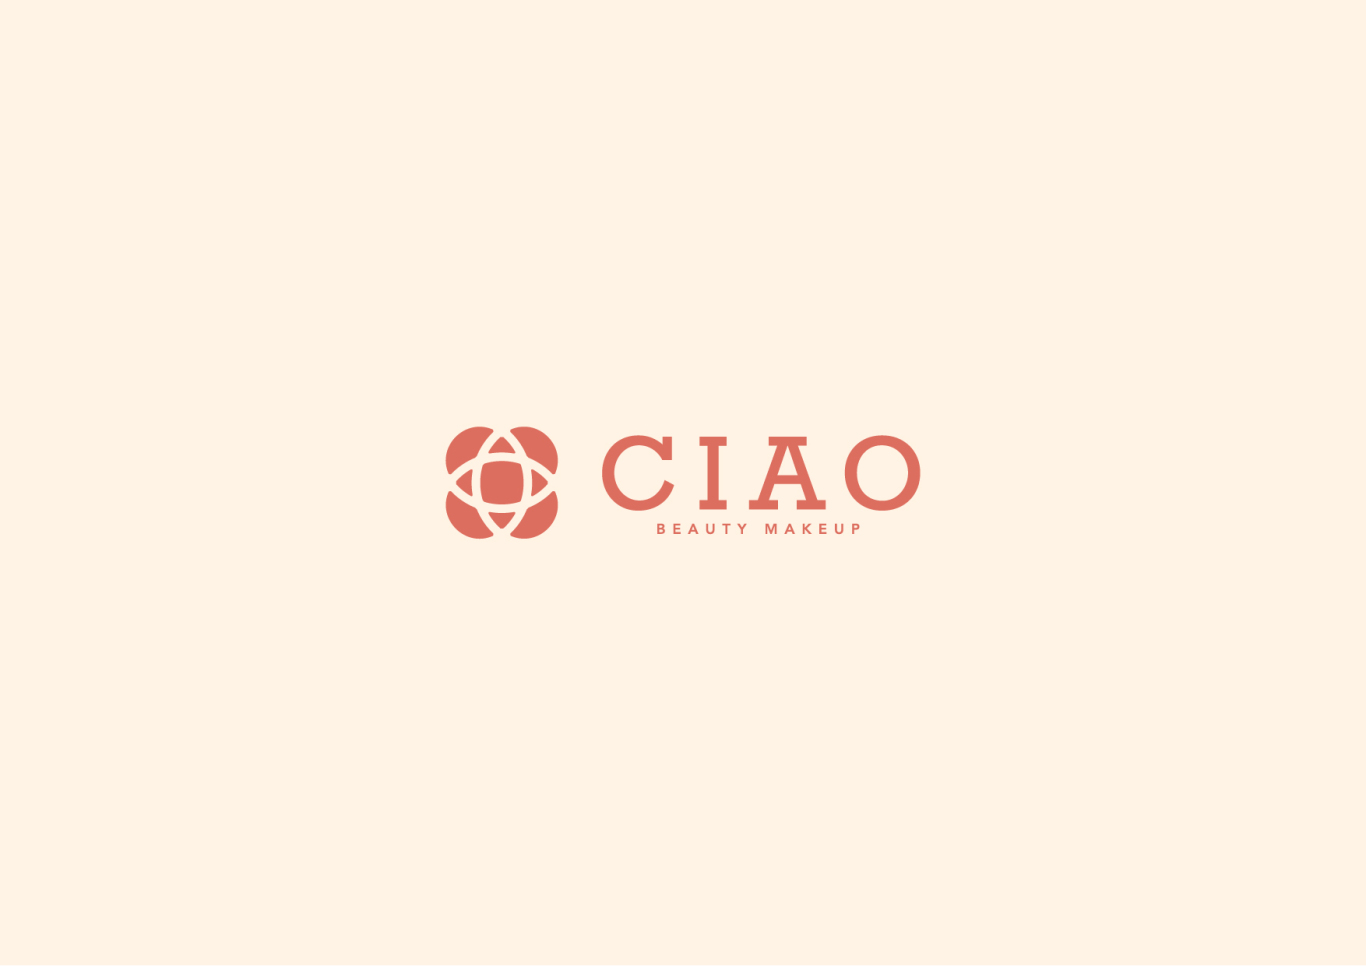 Ciao美妆logo设计图16